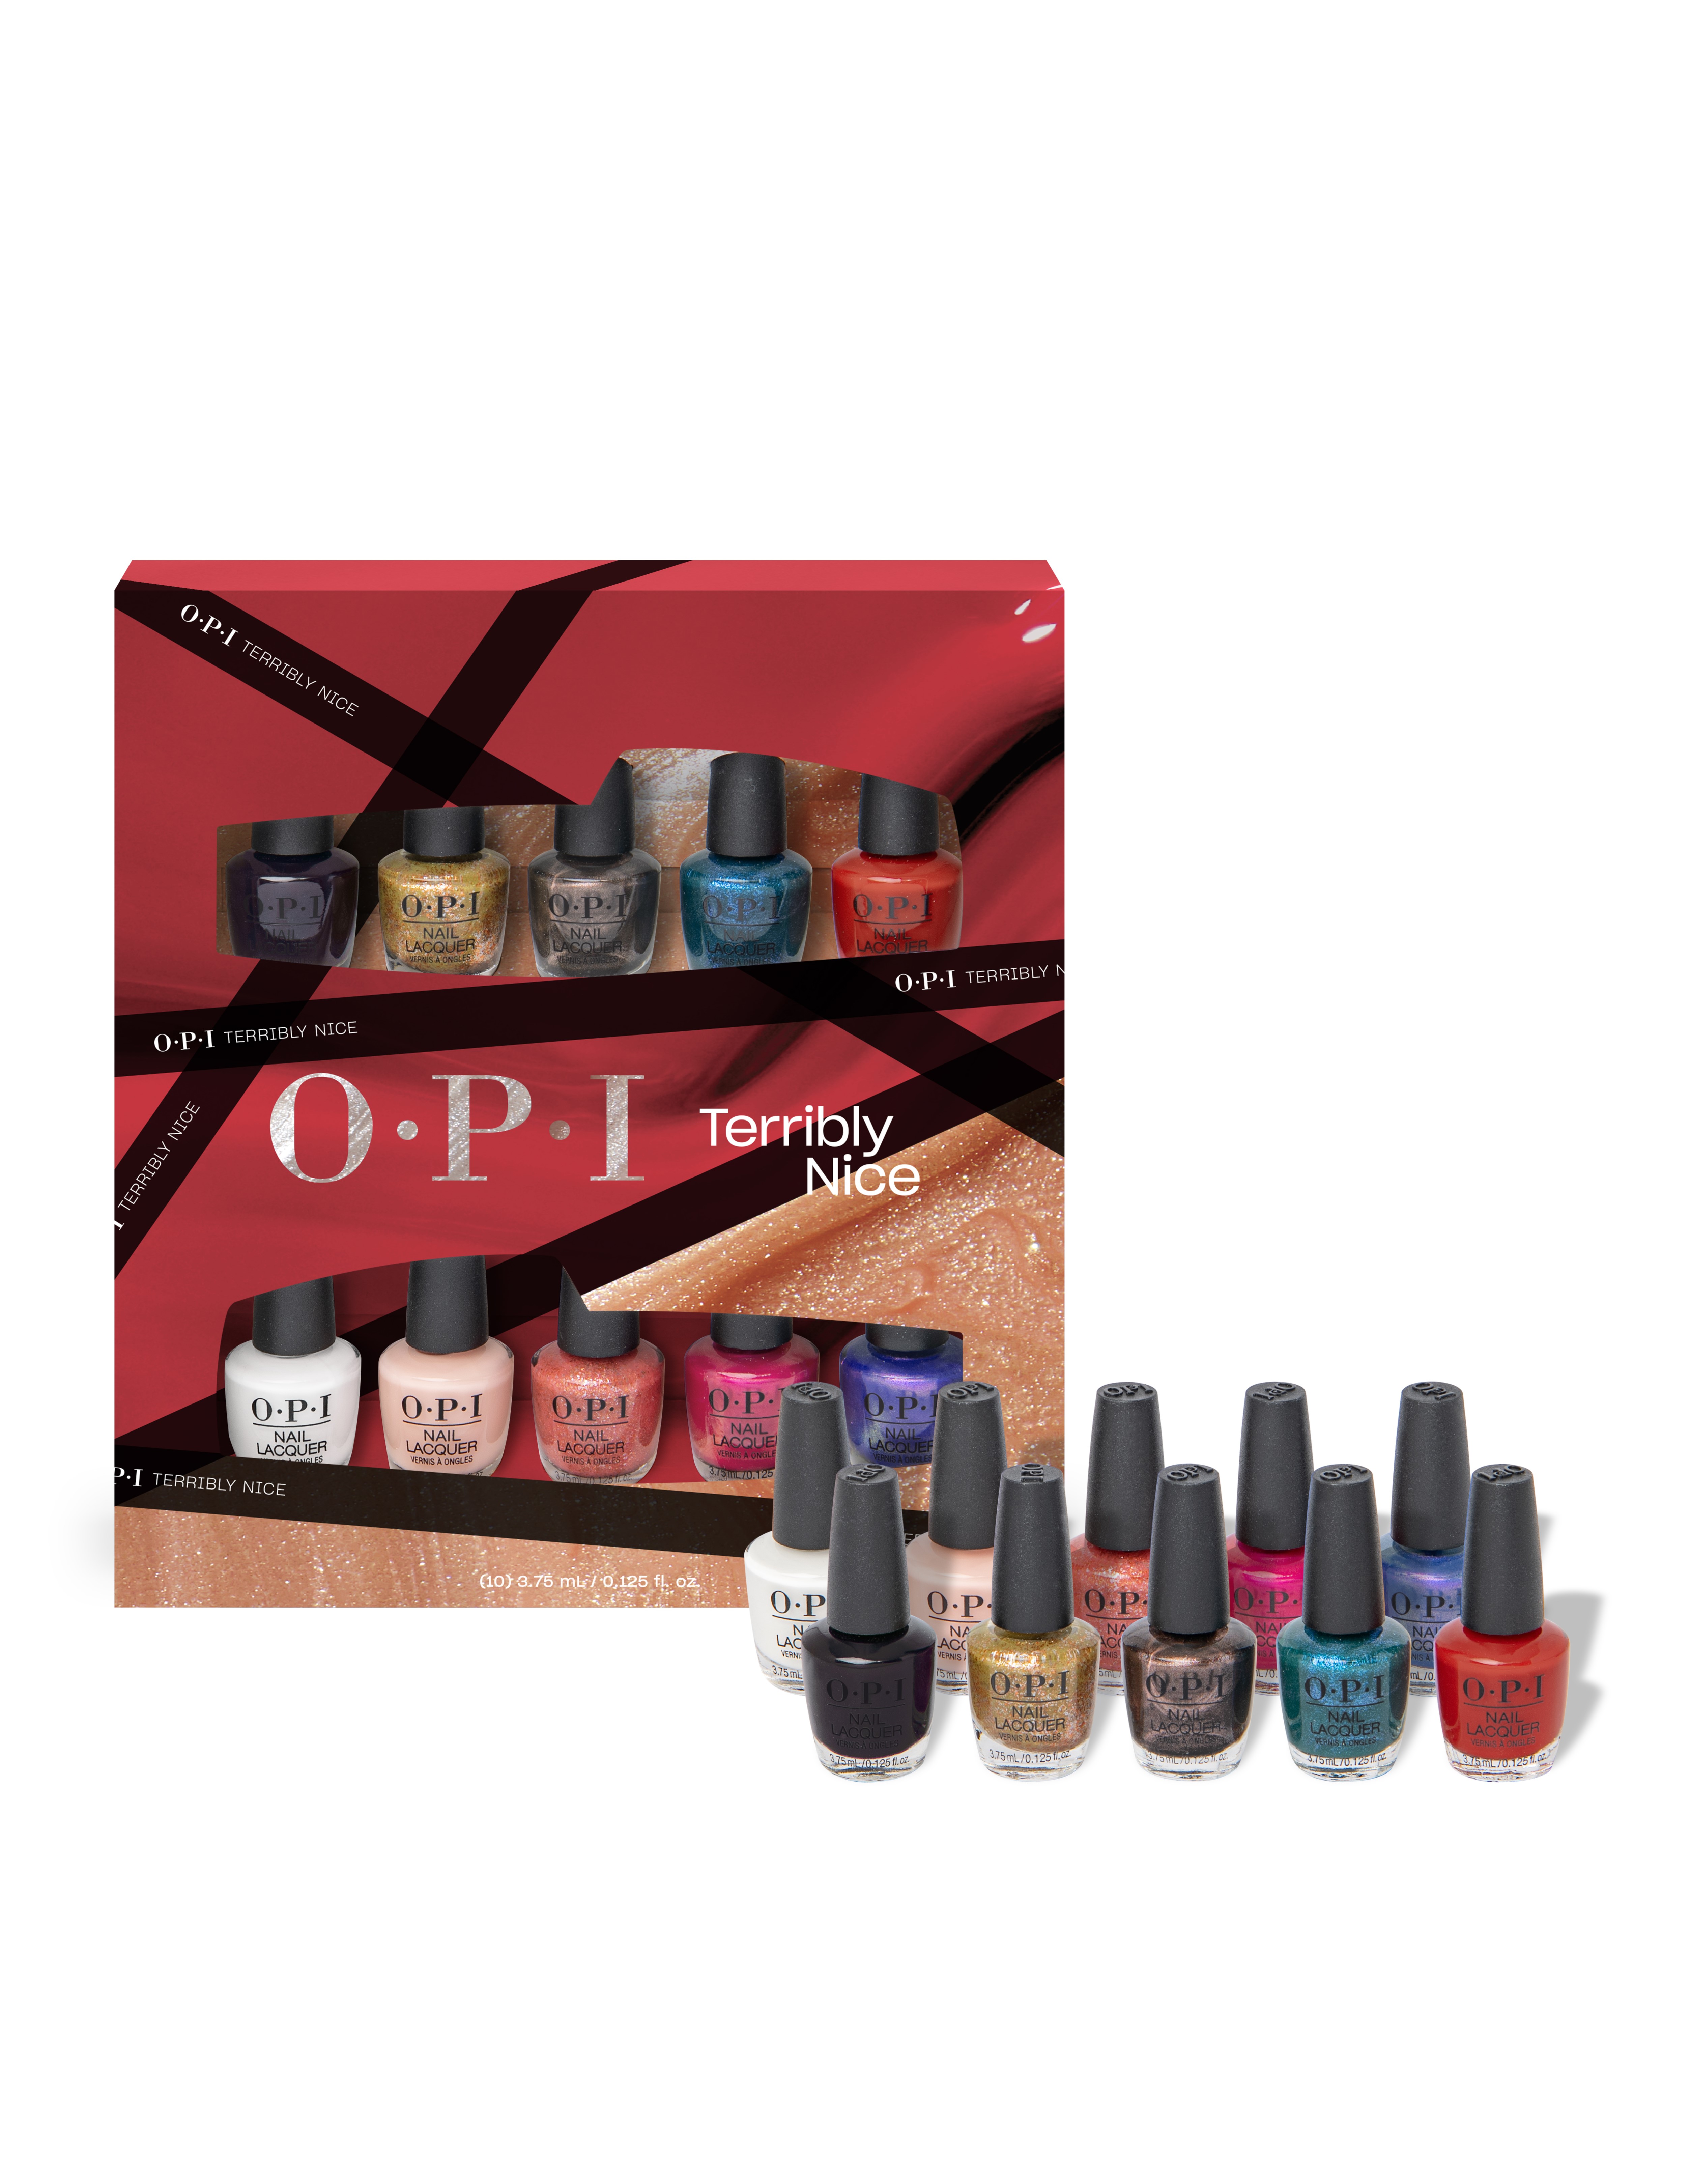 OPI Terribly Nice Nail Lacquer Mini 10 Piece Stocking Stuffer, Holiday Polish Gifts - image 1 of 4